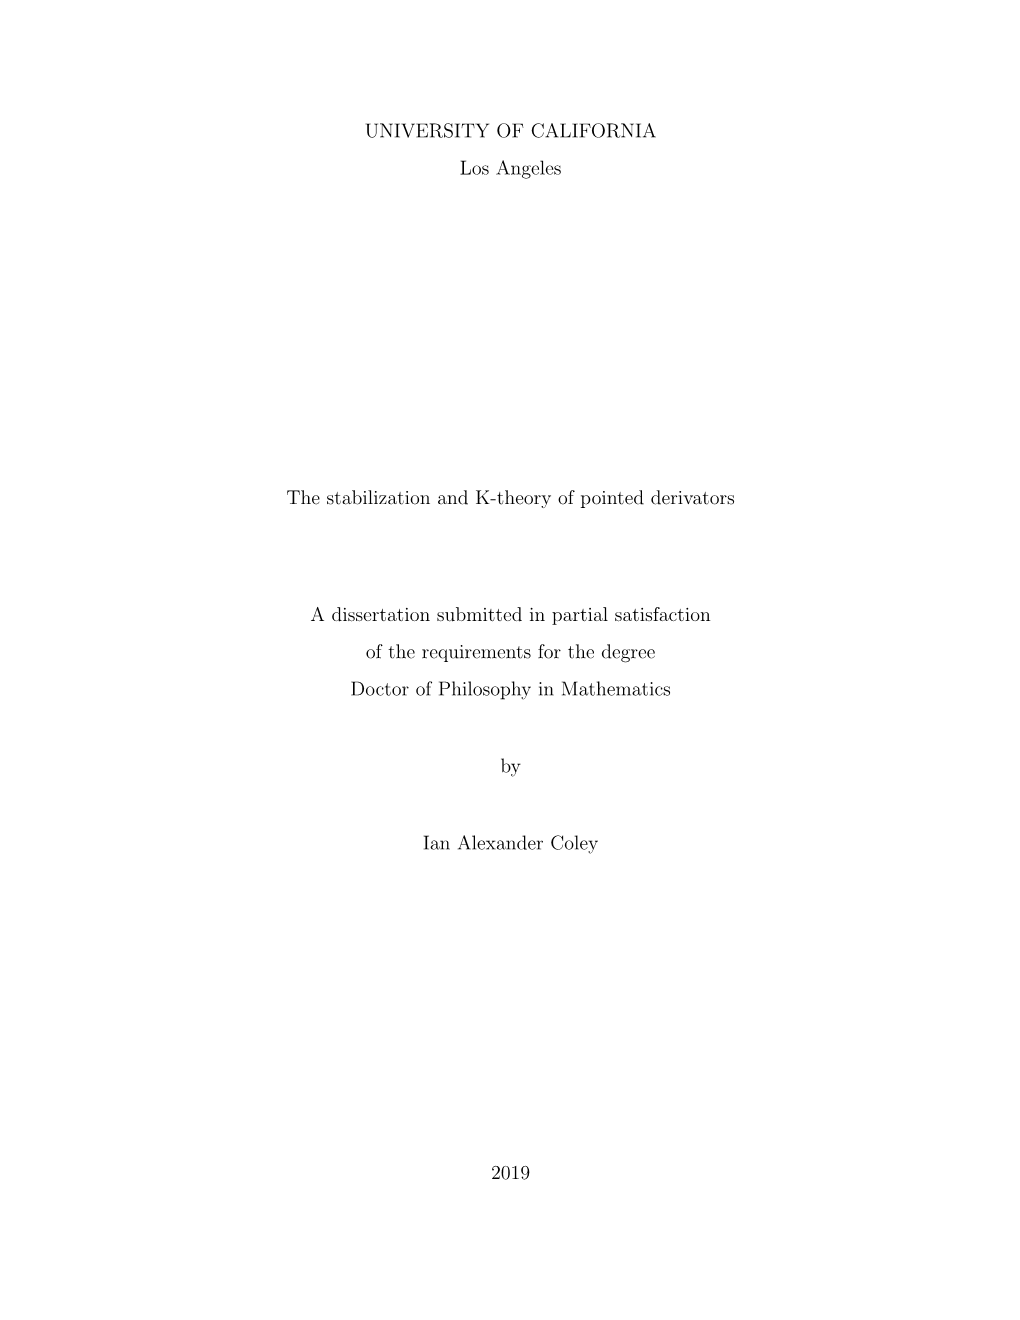 UNIVERSITY of CALIFORNIA Los Angeles the Stabilization and K-Theory of Pointed Derivators a Dissertation Submitted in Partial Sa